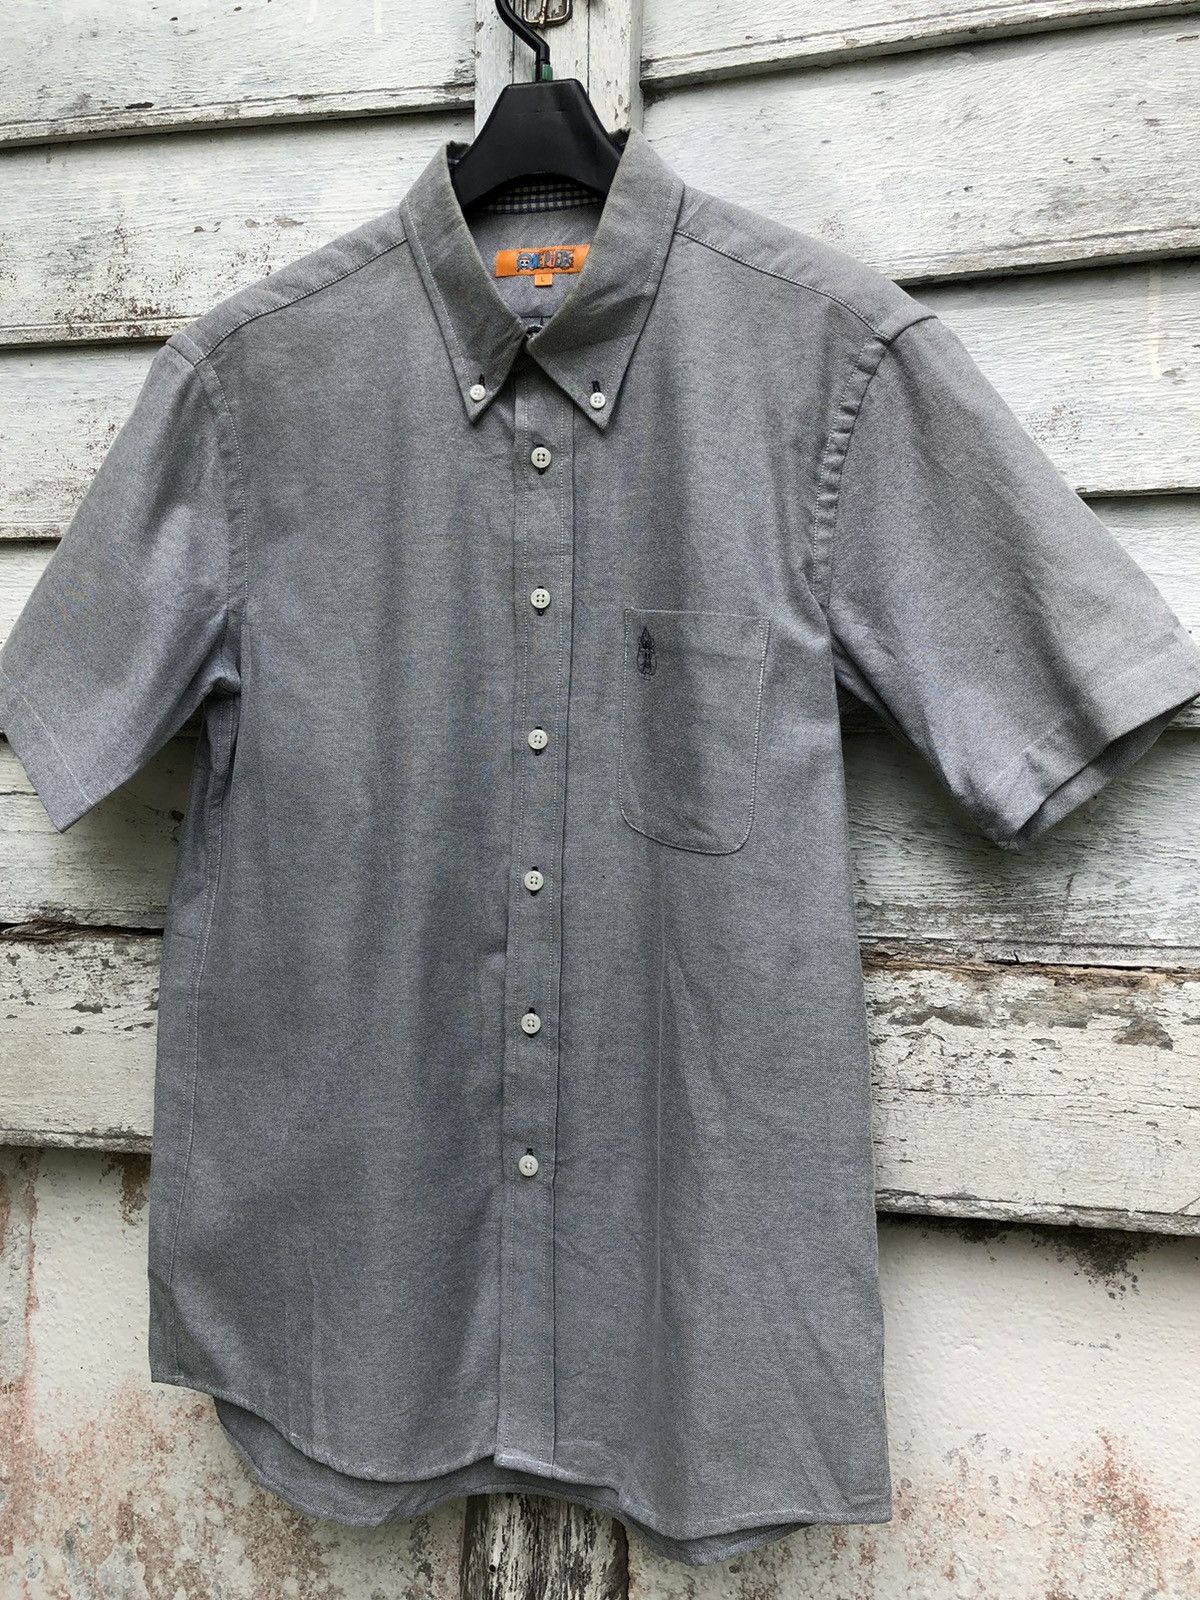 OFFICIAL ONE PIECE CHAMBRAY BUTTON SHIRT S/S - 2